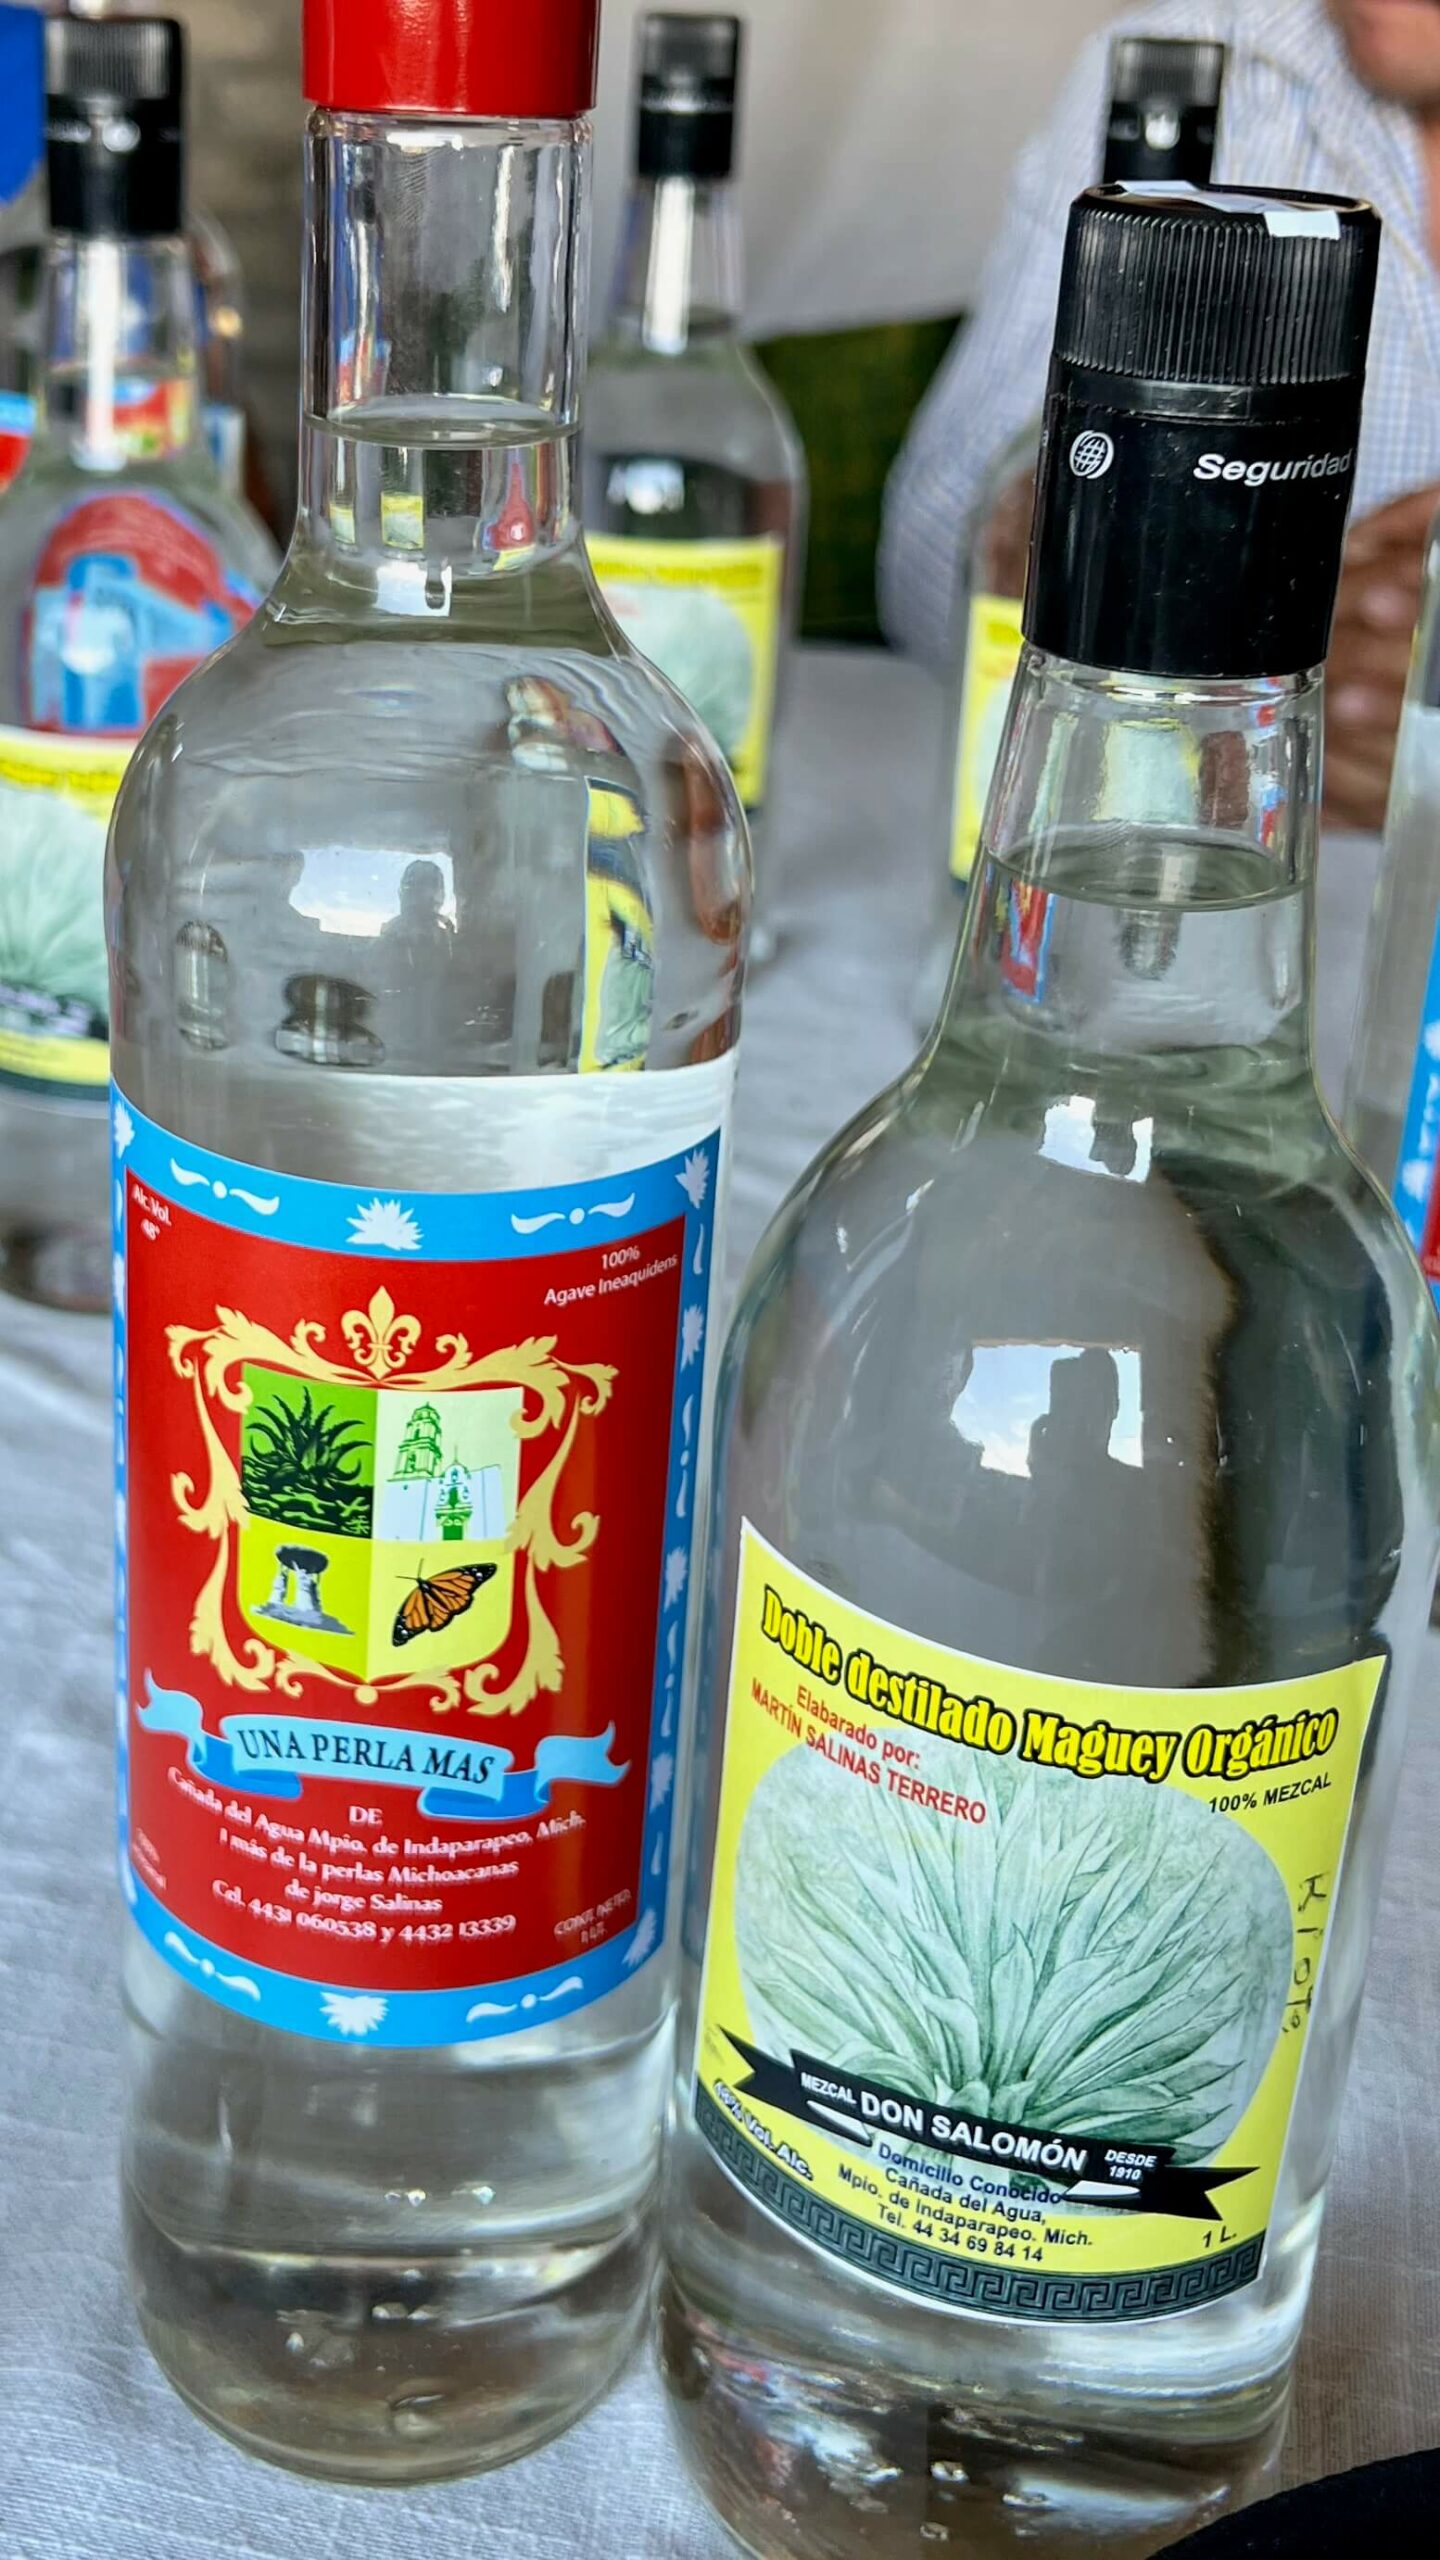 Two bottles of mezcal from the Salinas brothers in Michoacan, Mexico